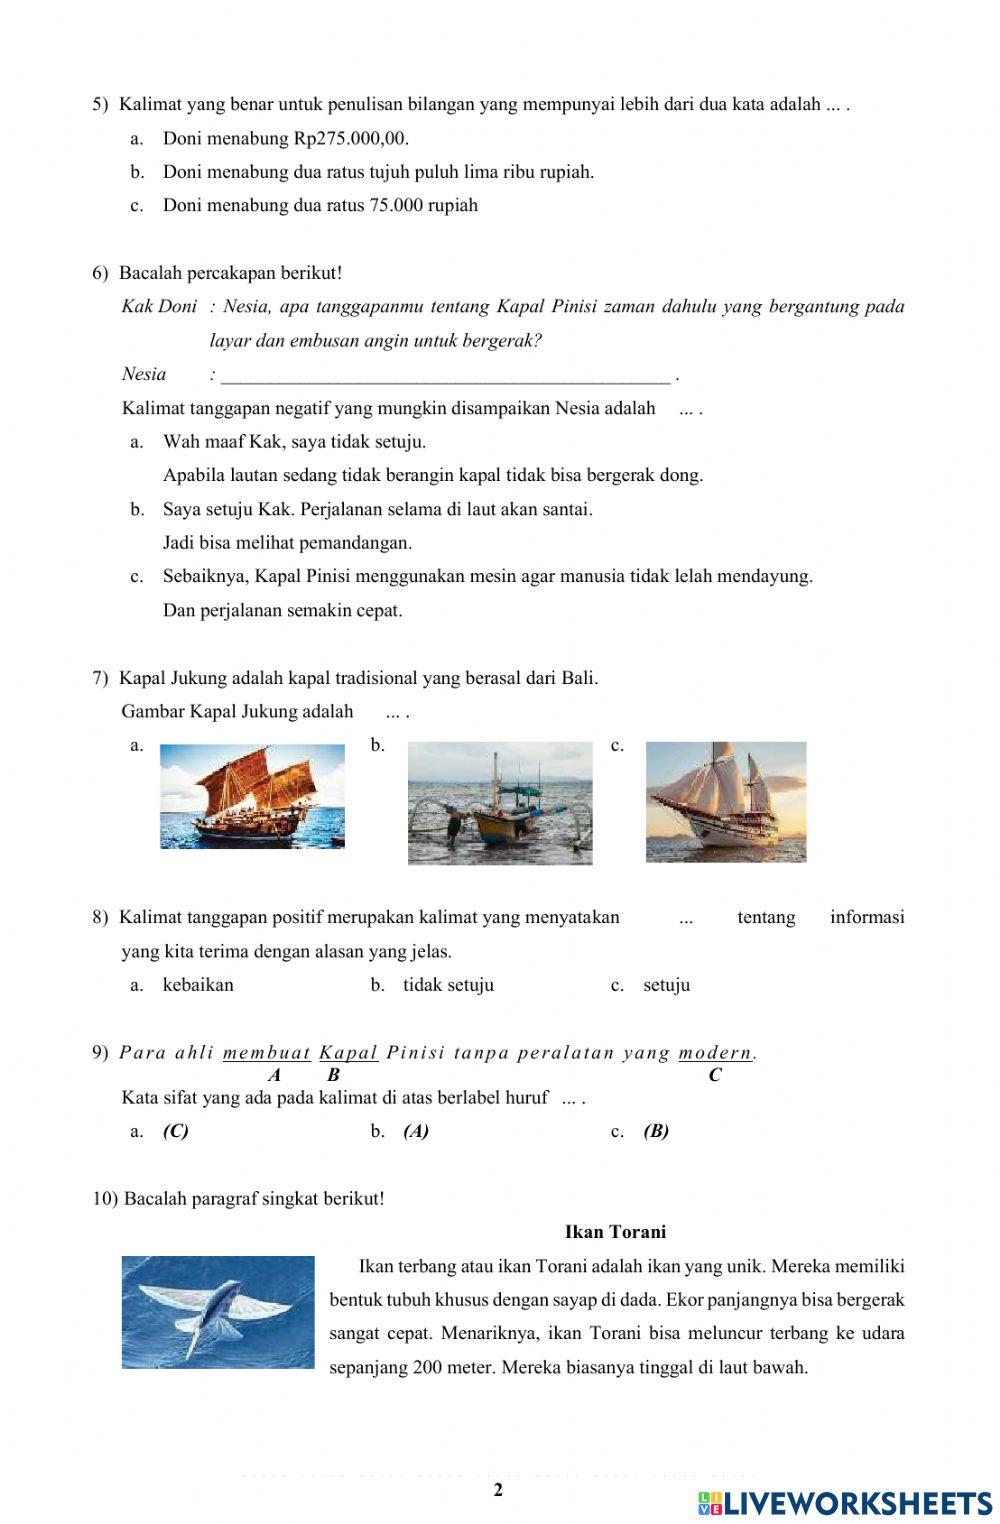 Review Bahasa Indonesia 2-before PAS 1-2021